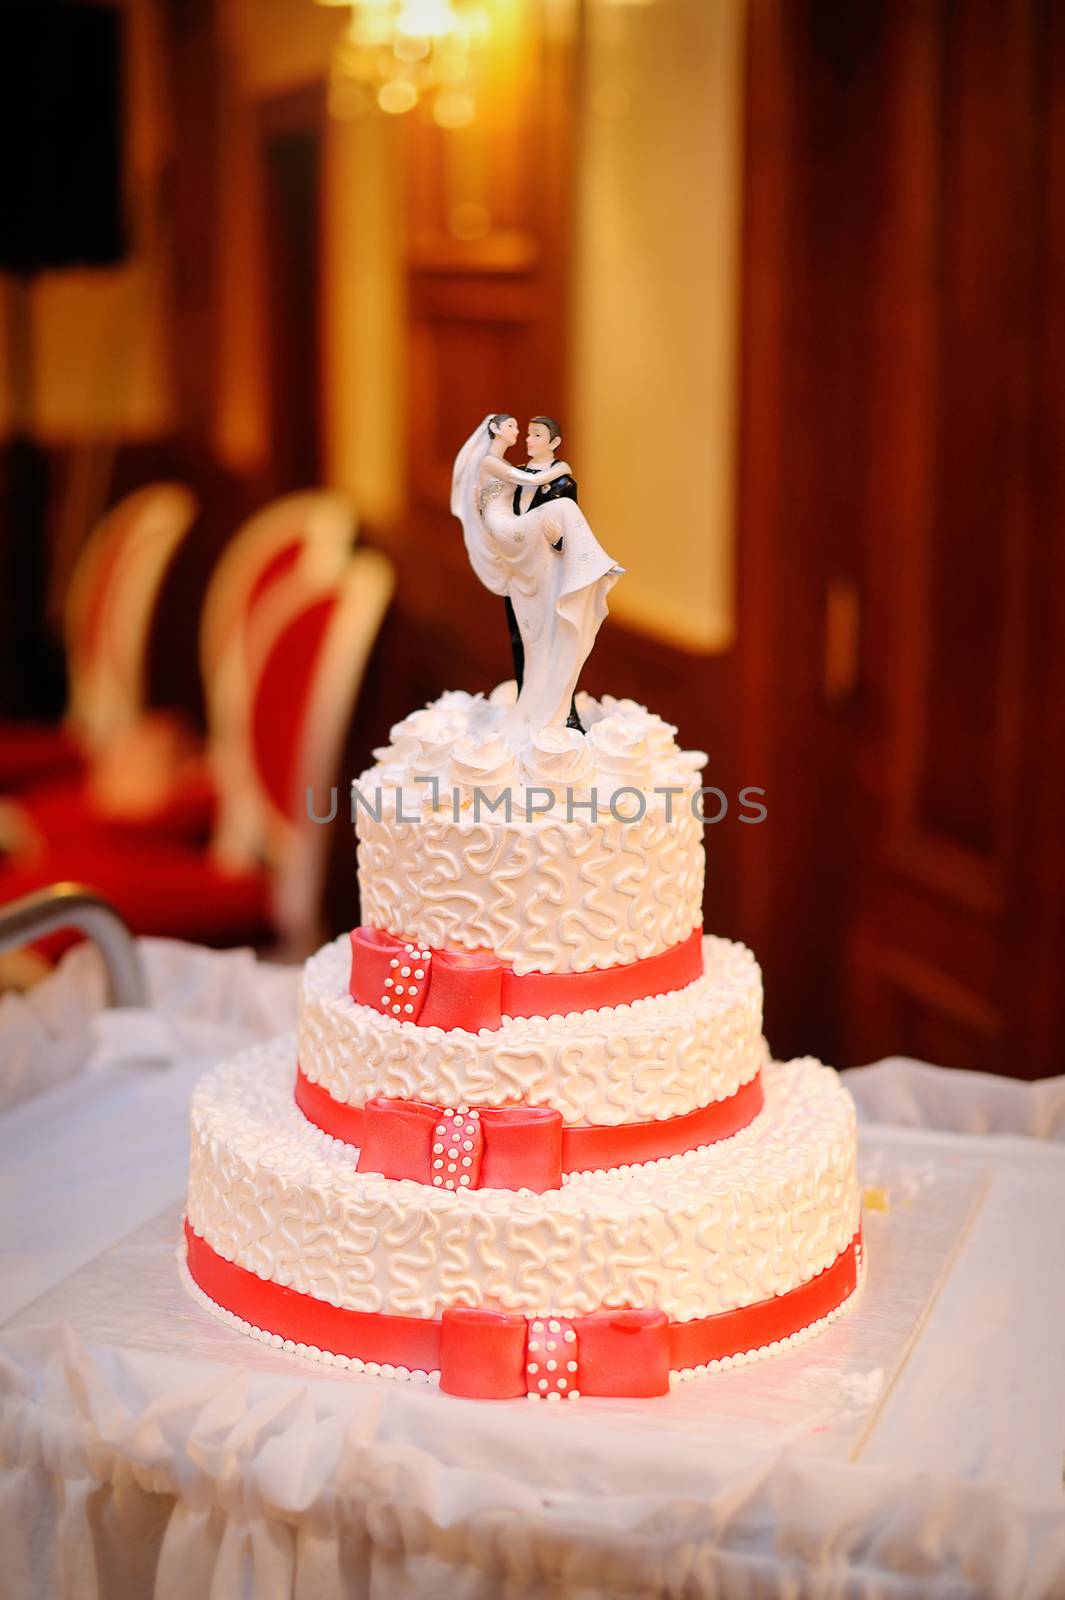 three-tiered white wedding cake with red ribbons.